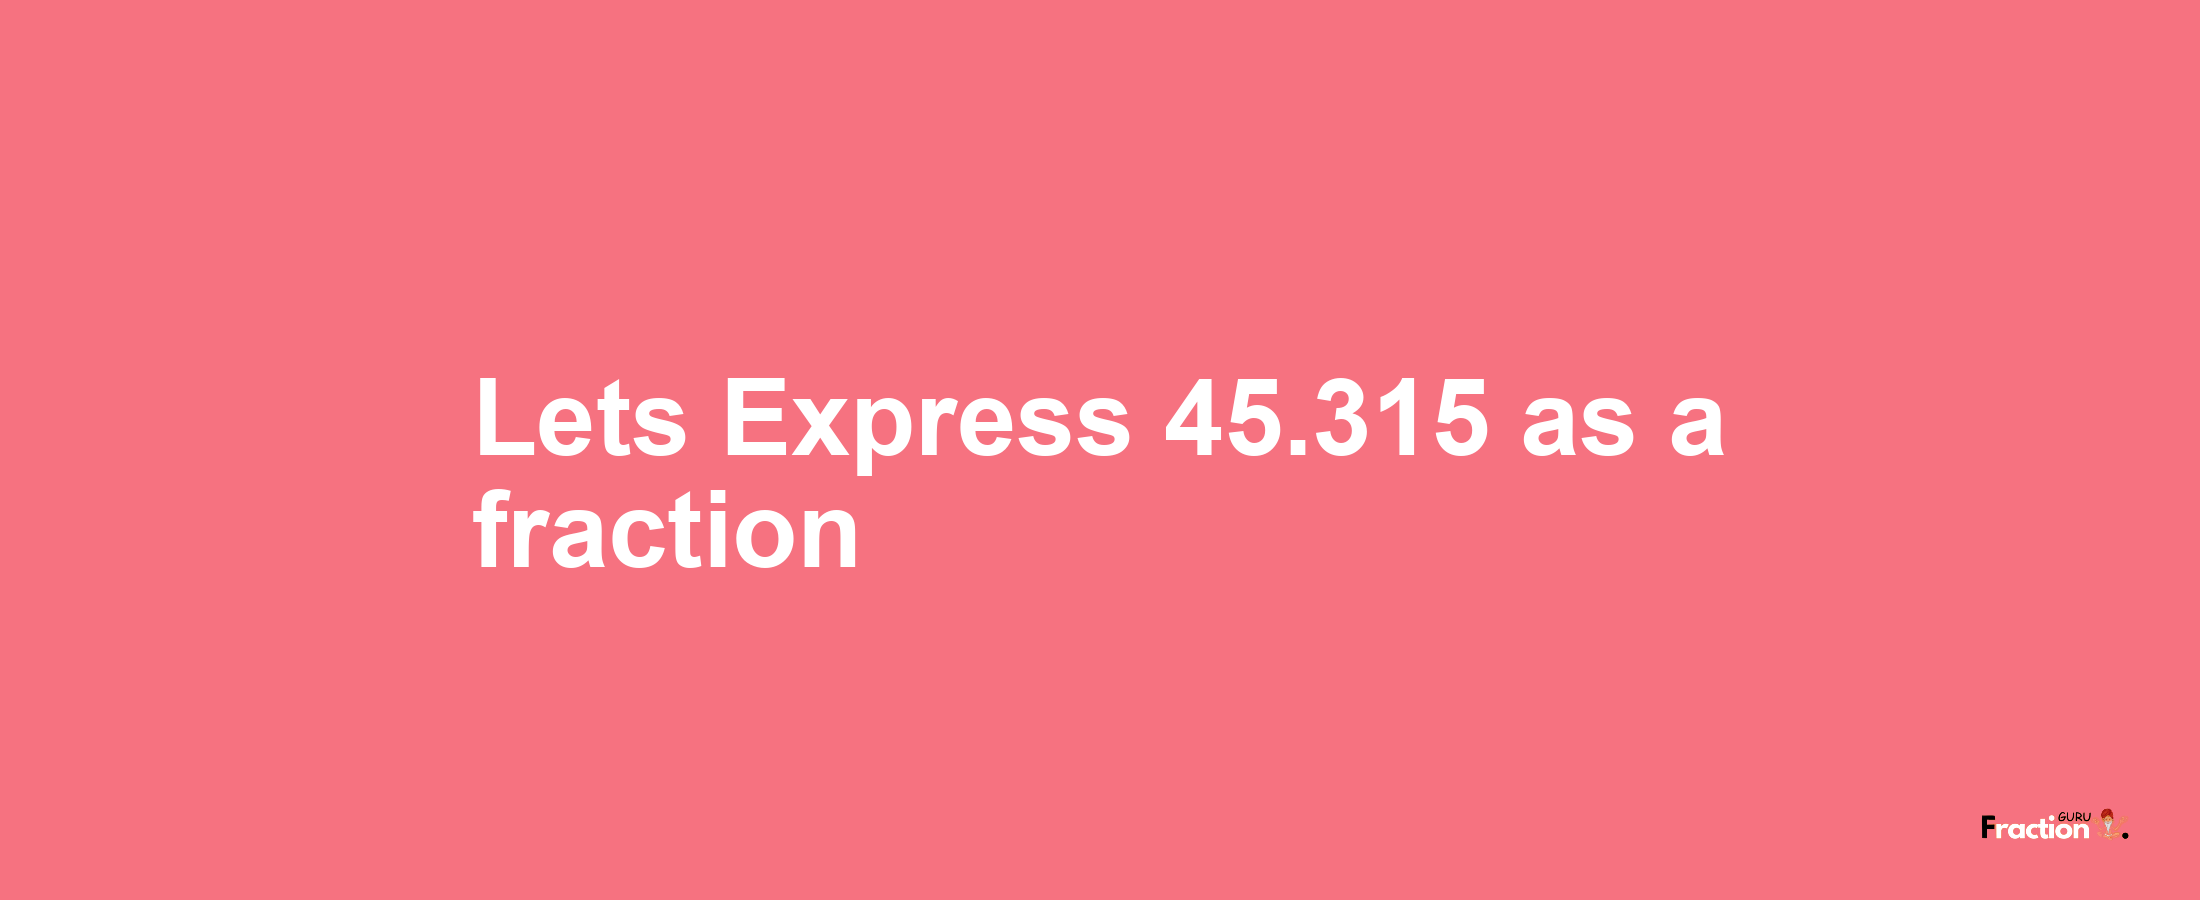 Lets Express 45.315 as afraction